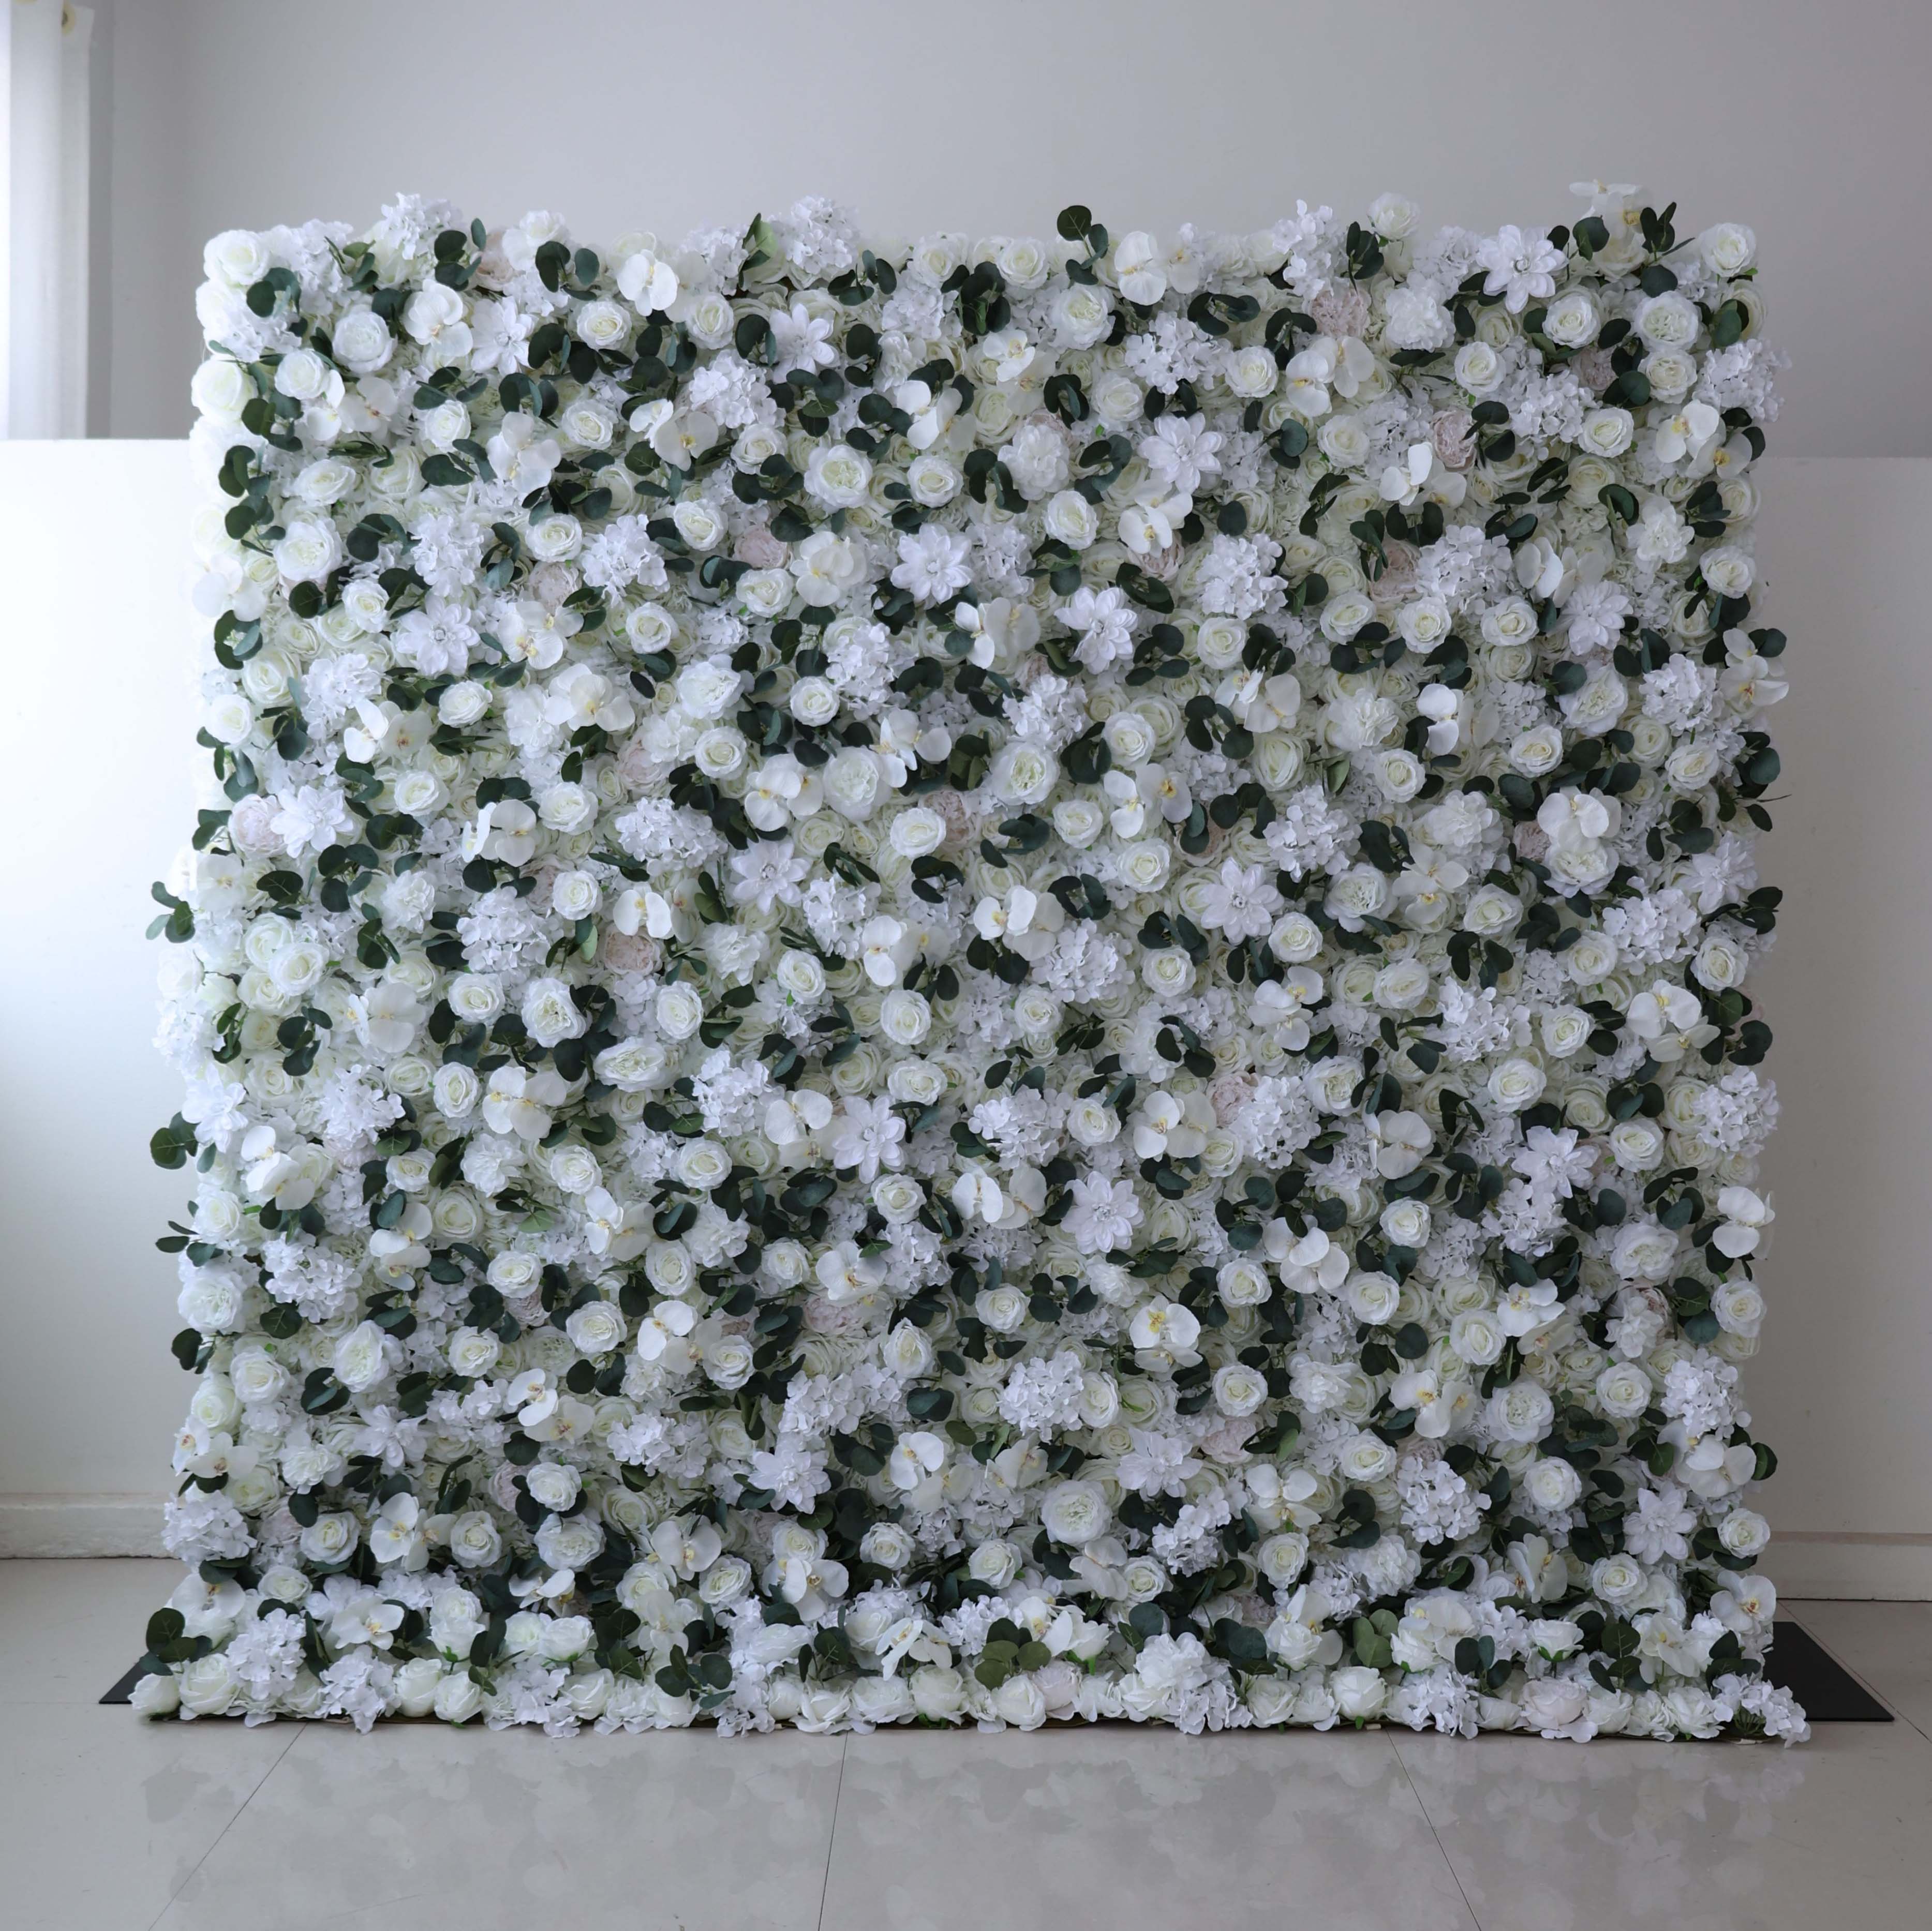 Valar Flowers roll up fabric artificial flower wall for wedding backdrop, floral party decor, and event photography, model VF-3791